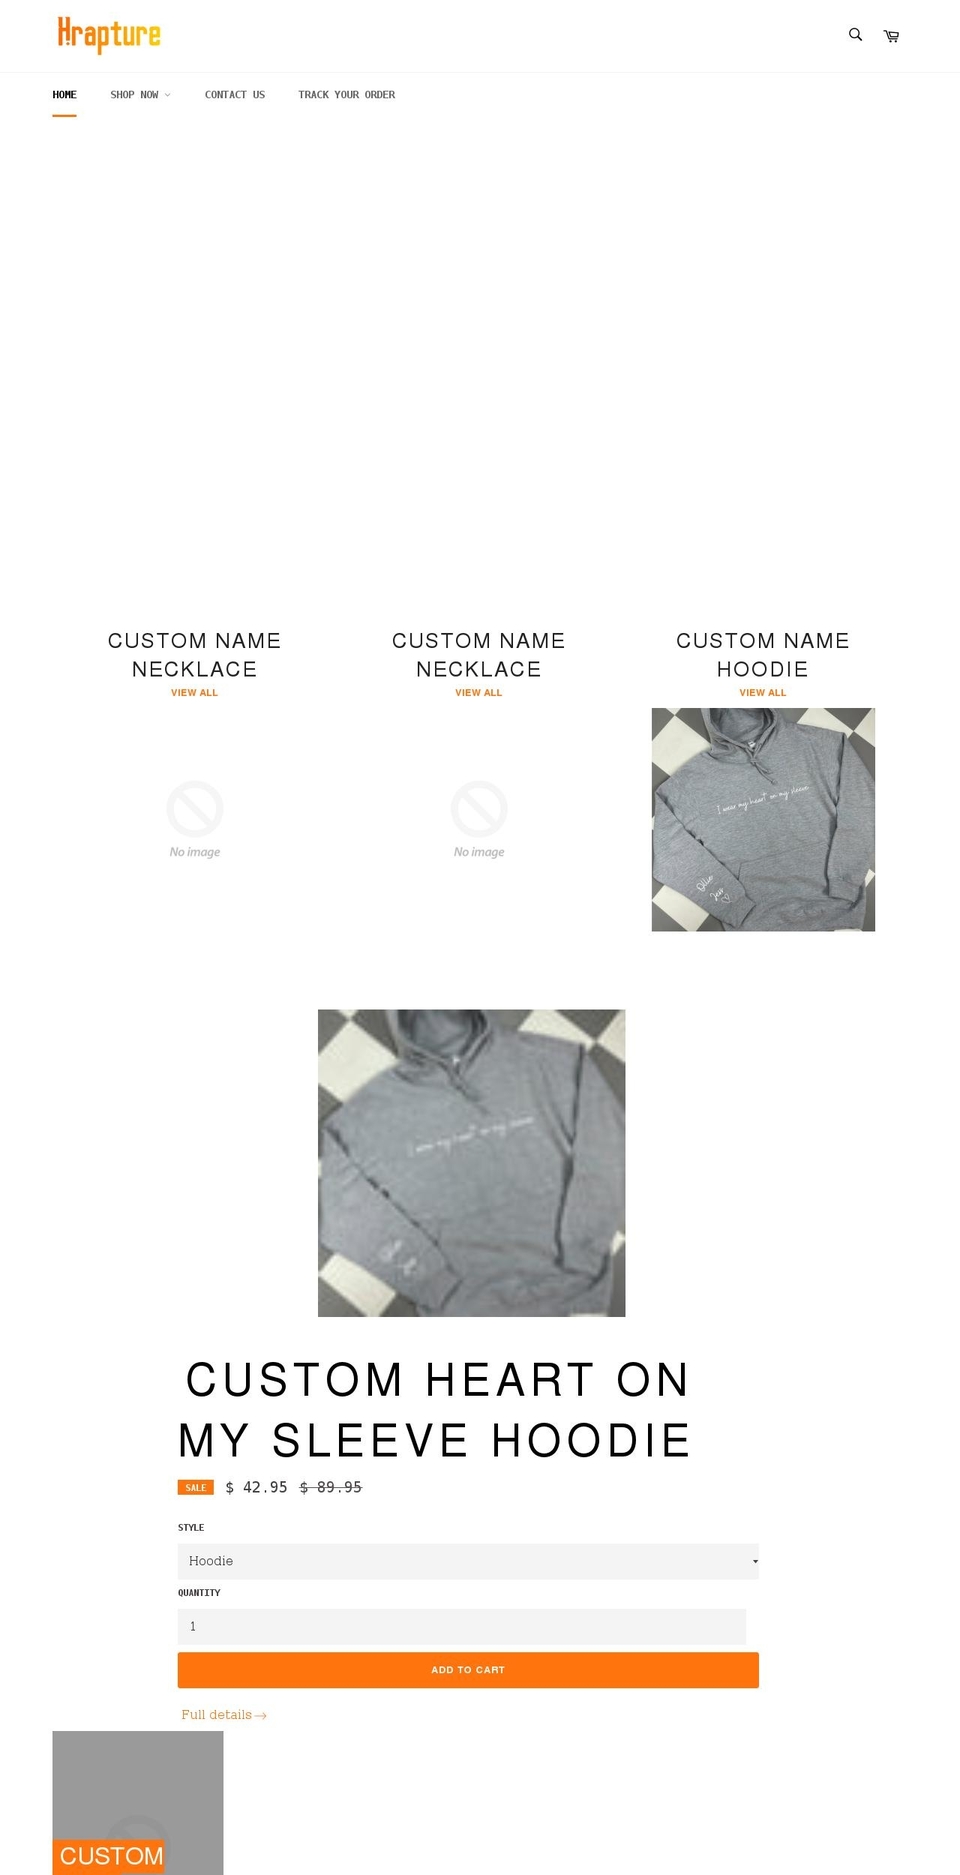 EcomSolid Shopify theme site example hrapture.com